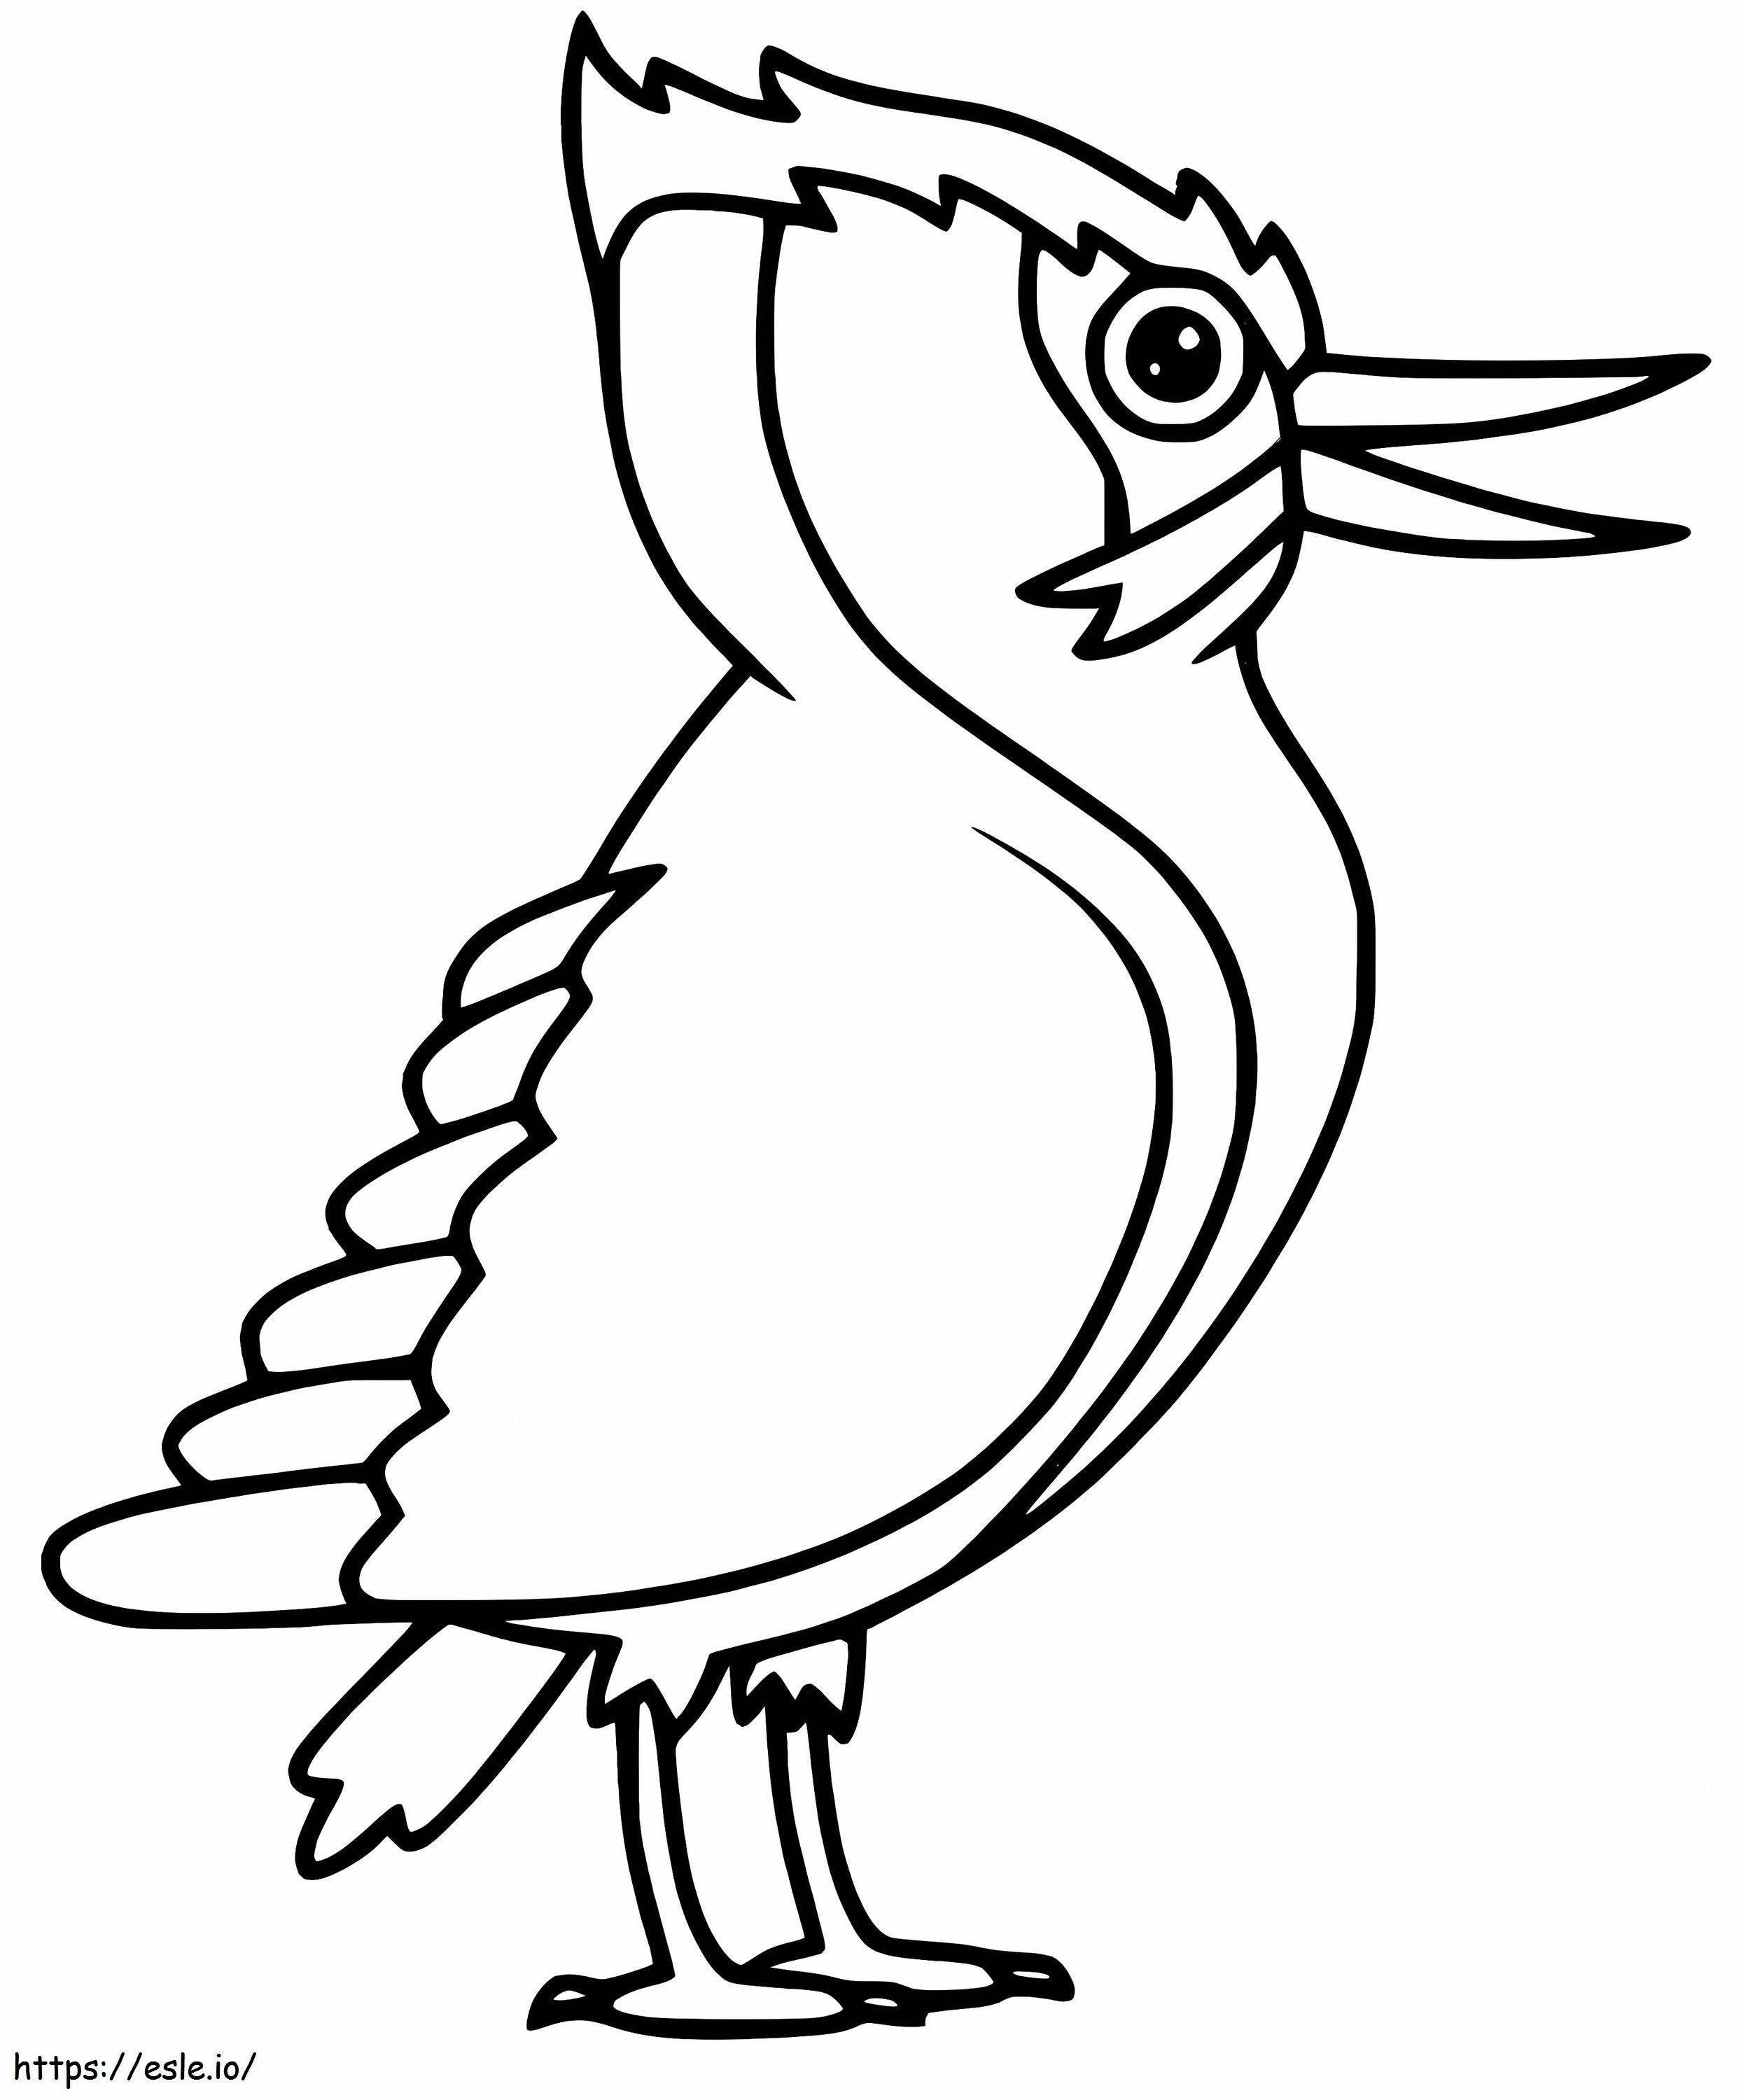 Funny Woodpecker 1 coloring page